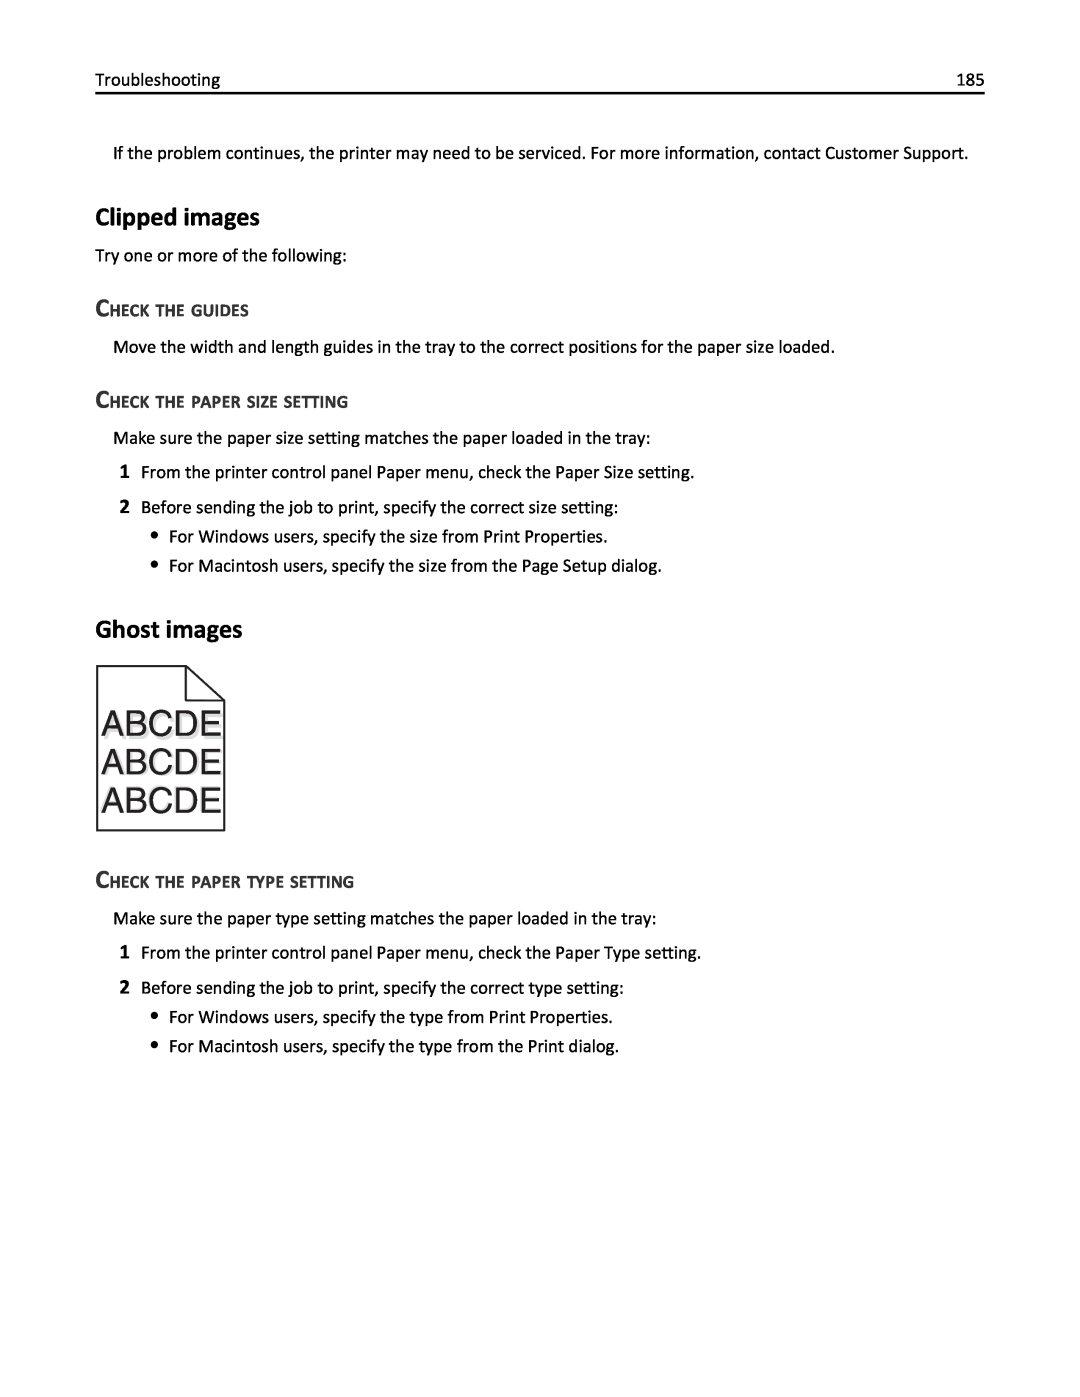 Lexmark 19Z0301, 110 manual Abcde Abcde Abcde, Clipped images, Ghost images, Check The Guides, Check The Paper Size Setting 